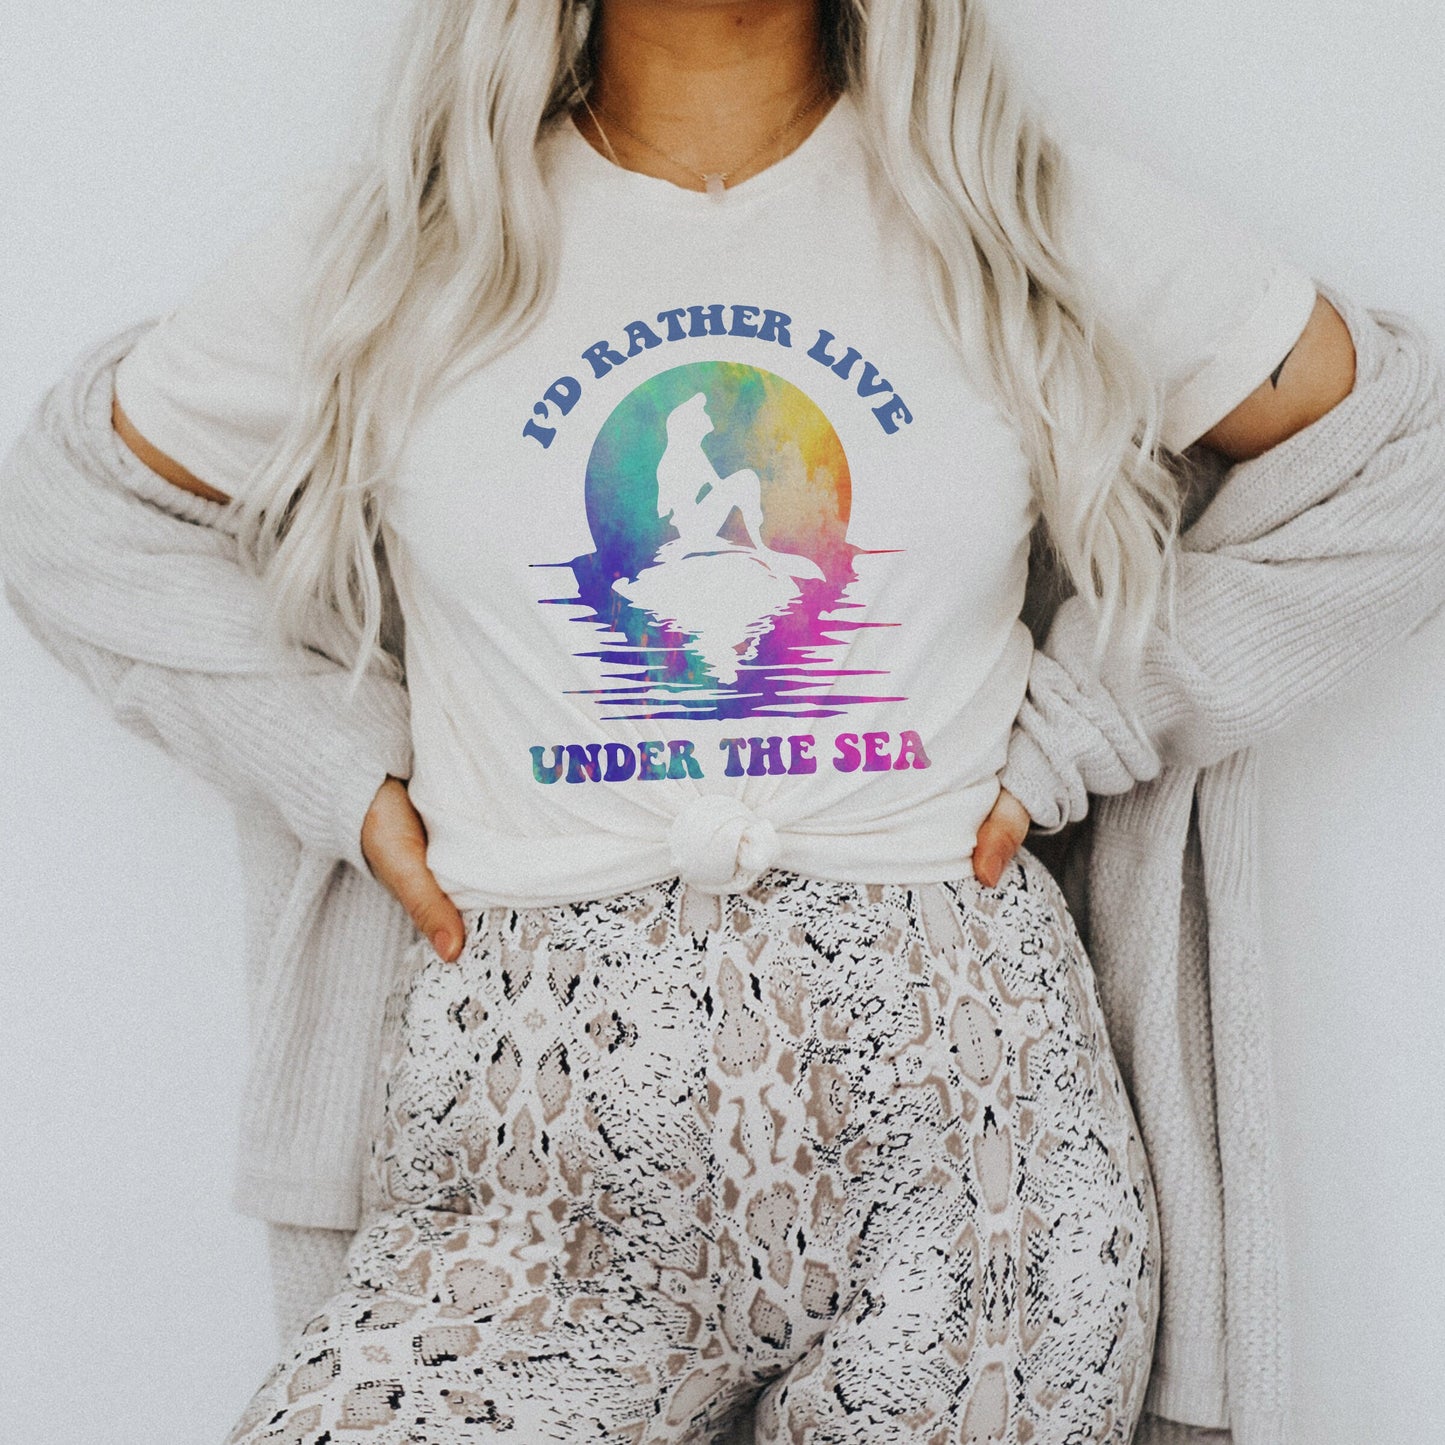 I'd Rather Live Under the Sea Cute Mermaid with a Little Nostalgia Tee Soft Graphic Tee Unisex Soft Tee T-shirt for Women or Men